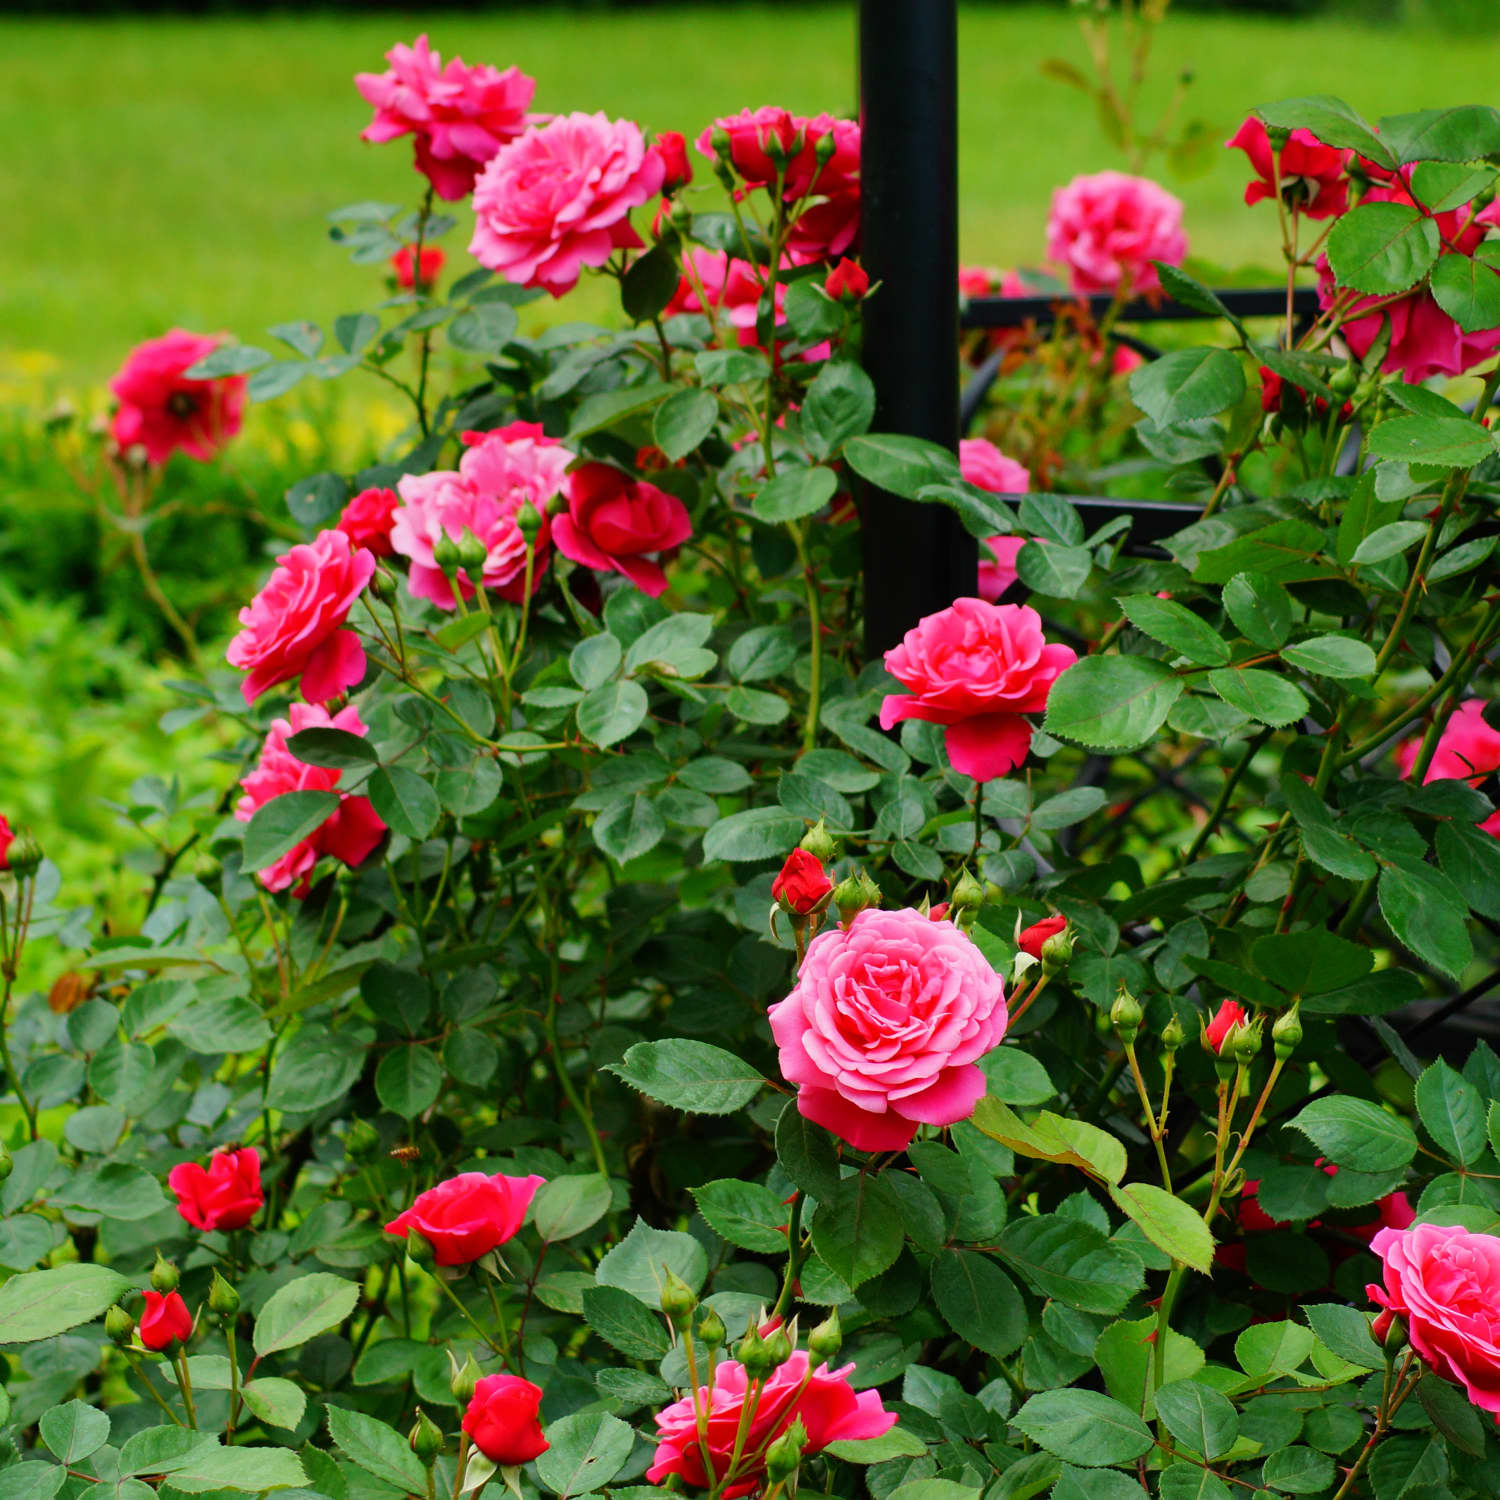 How to Replant Roses